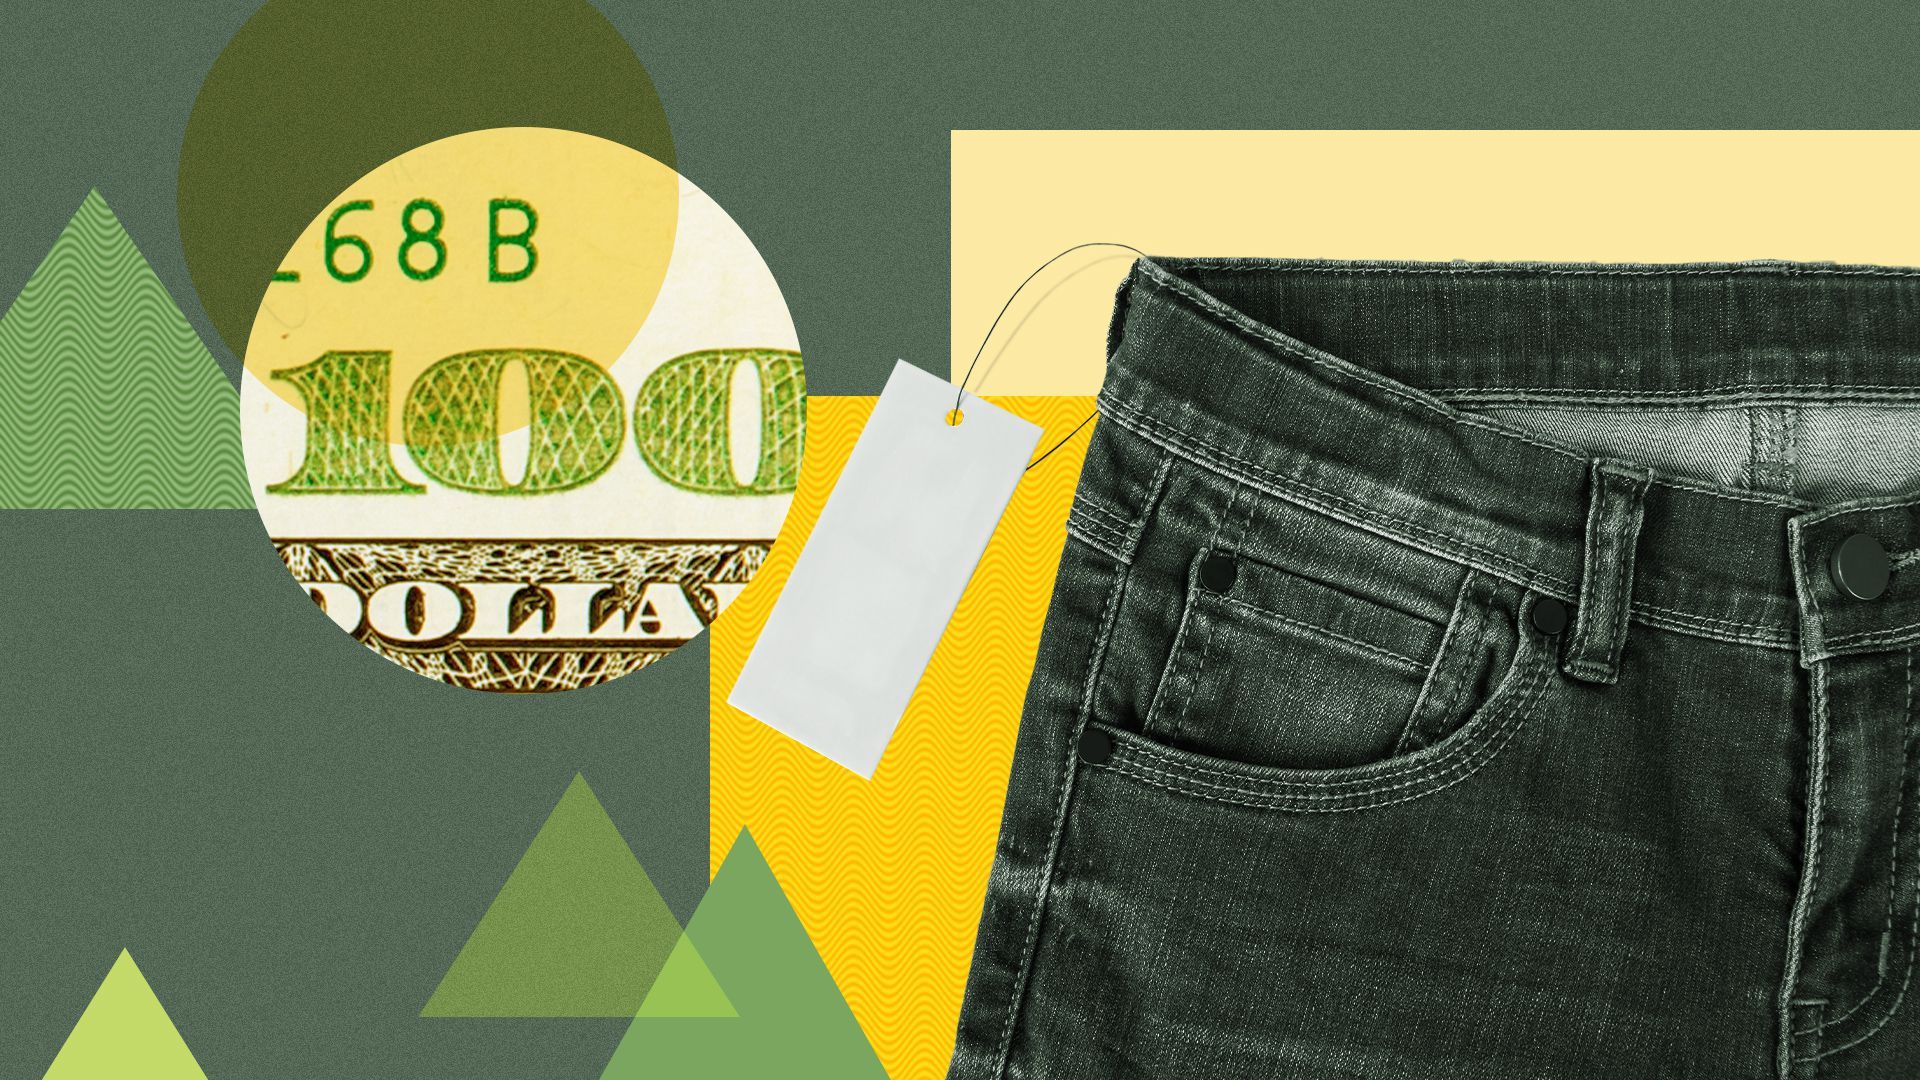 Illustration of a pair of jeans with a price tag surrounded by shapes and zoomed in section of $100 bill.